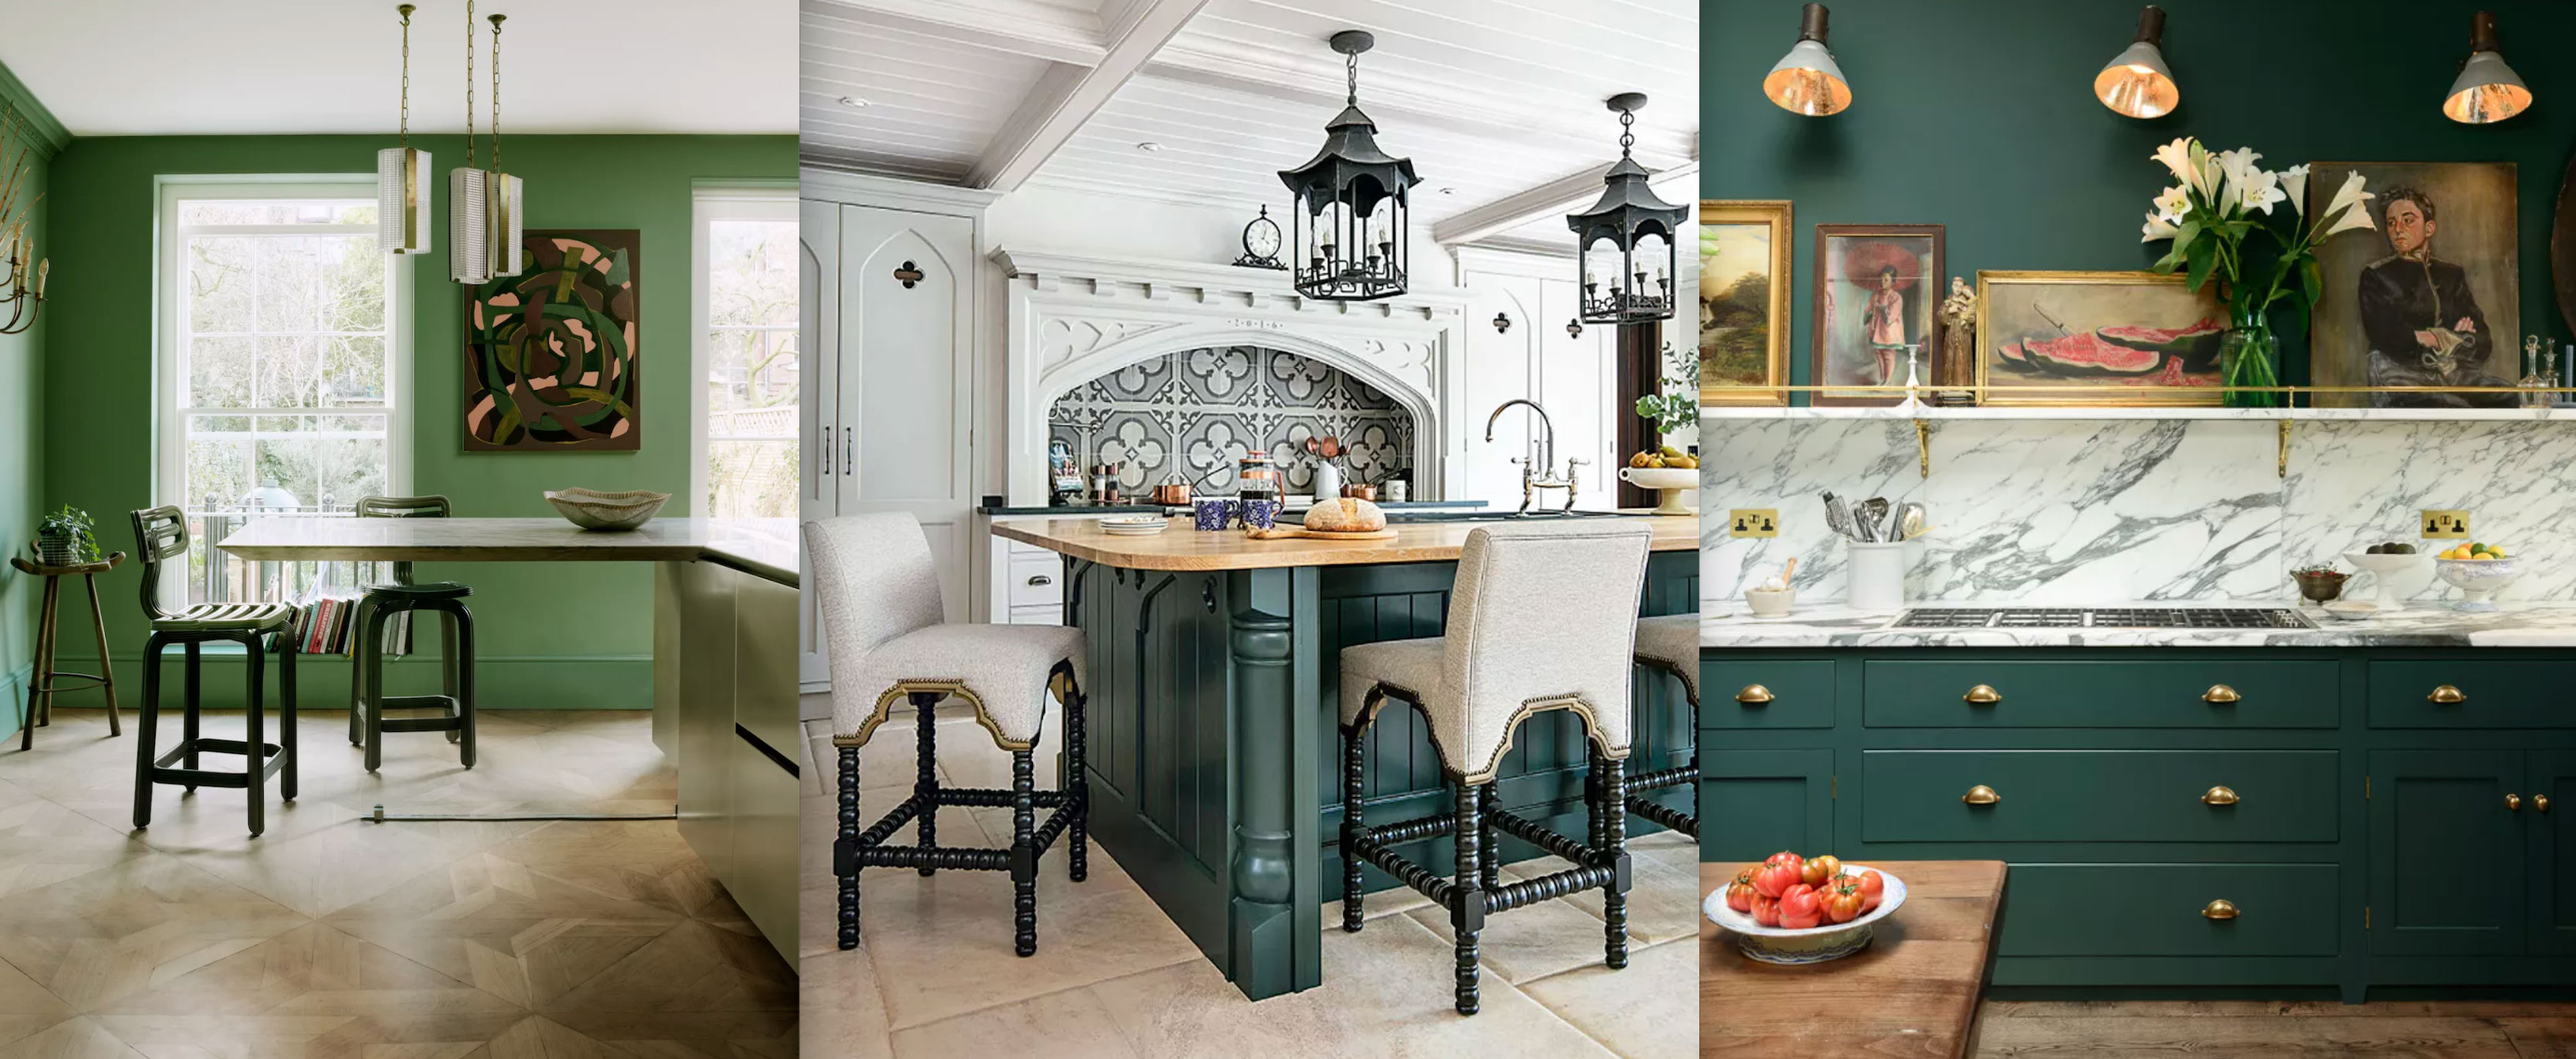 Green kitchen ideas 18 kitchens in sage, olive and apple   Homes ...